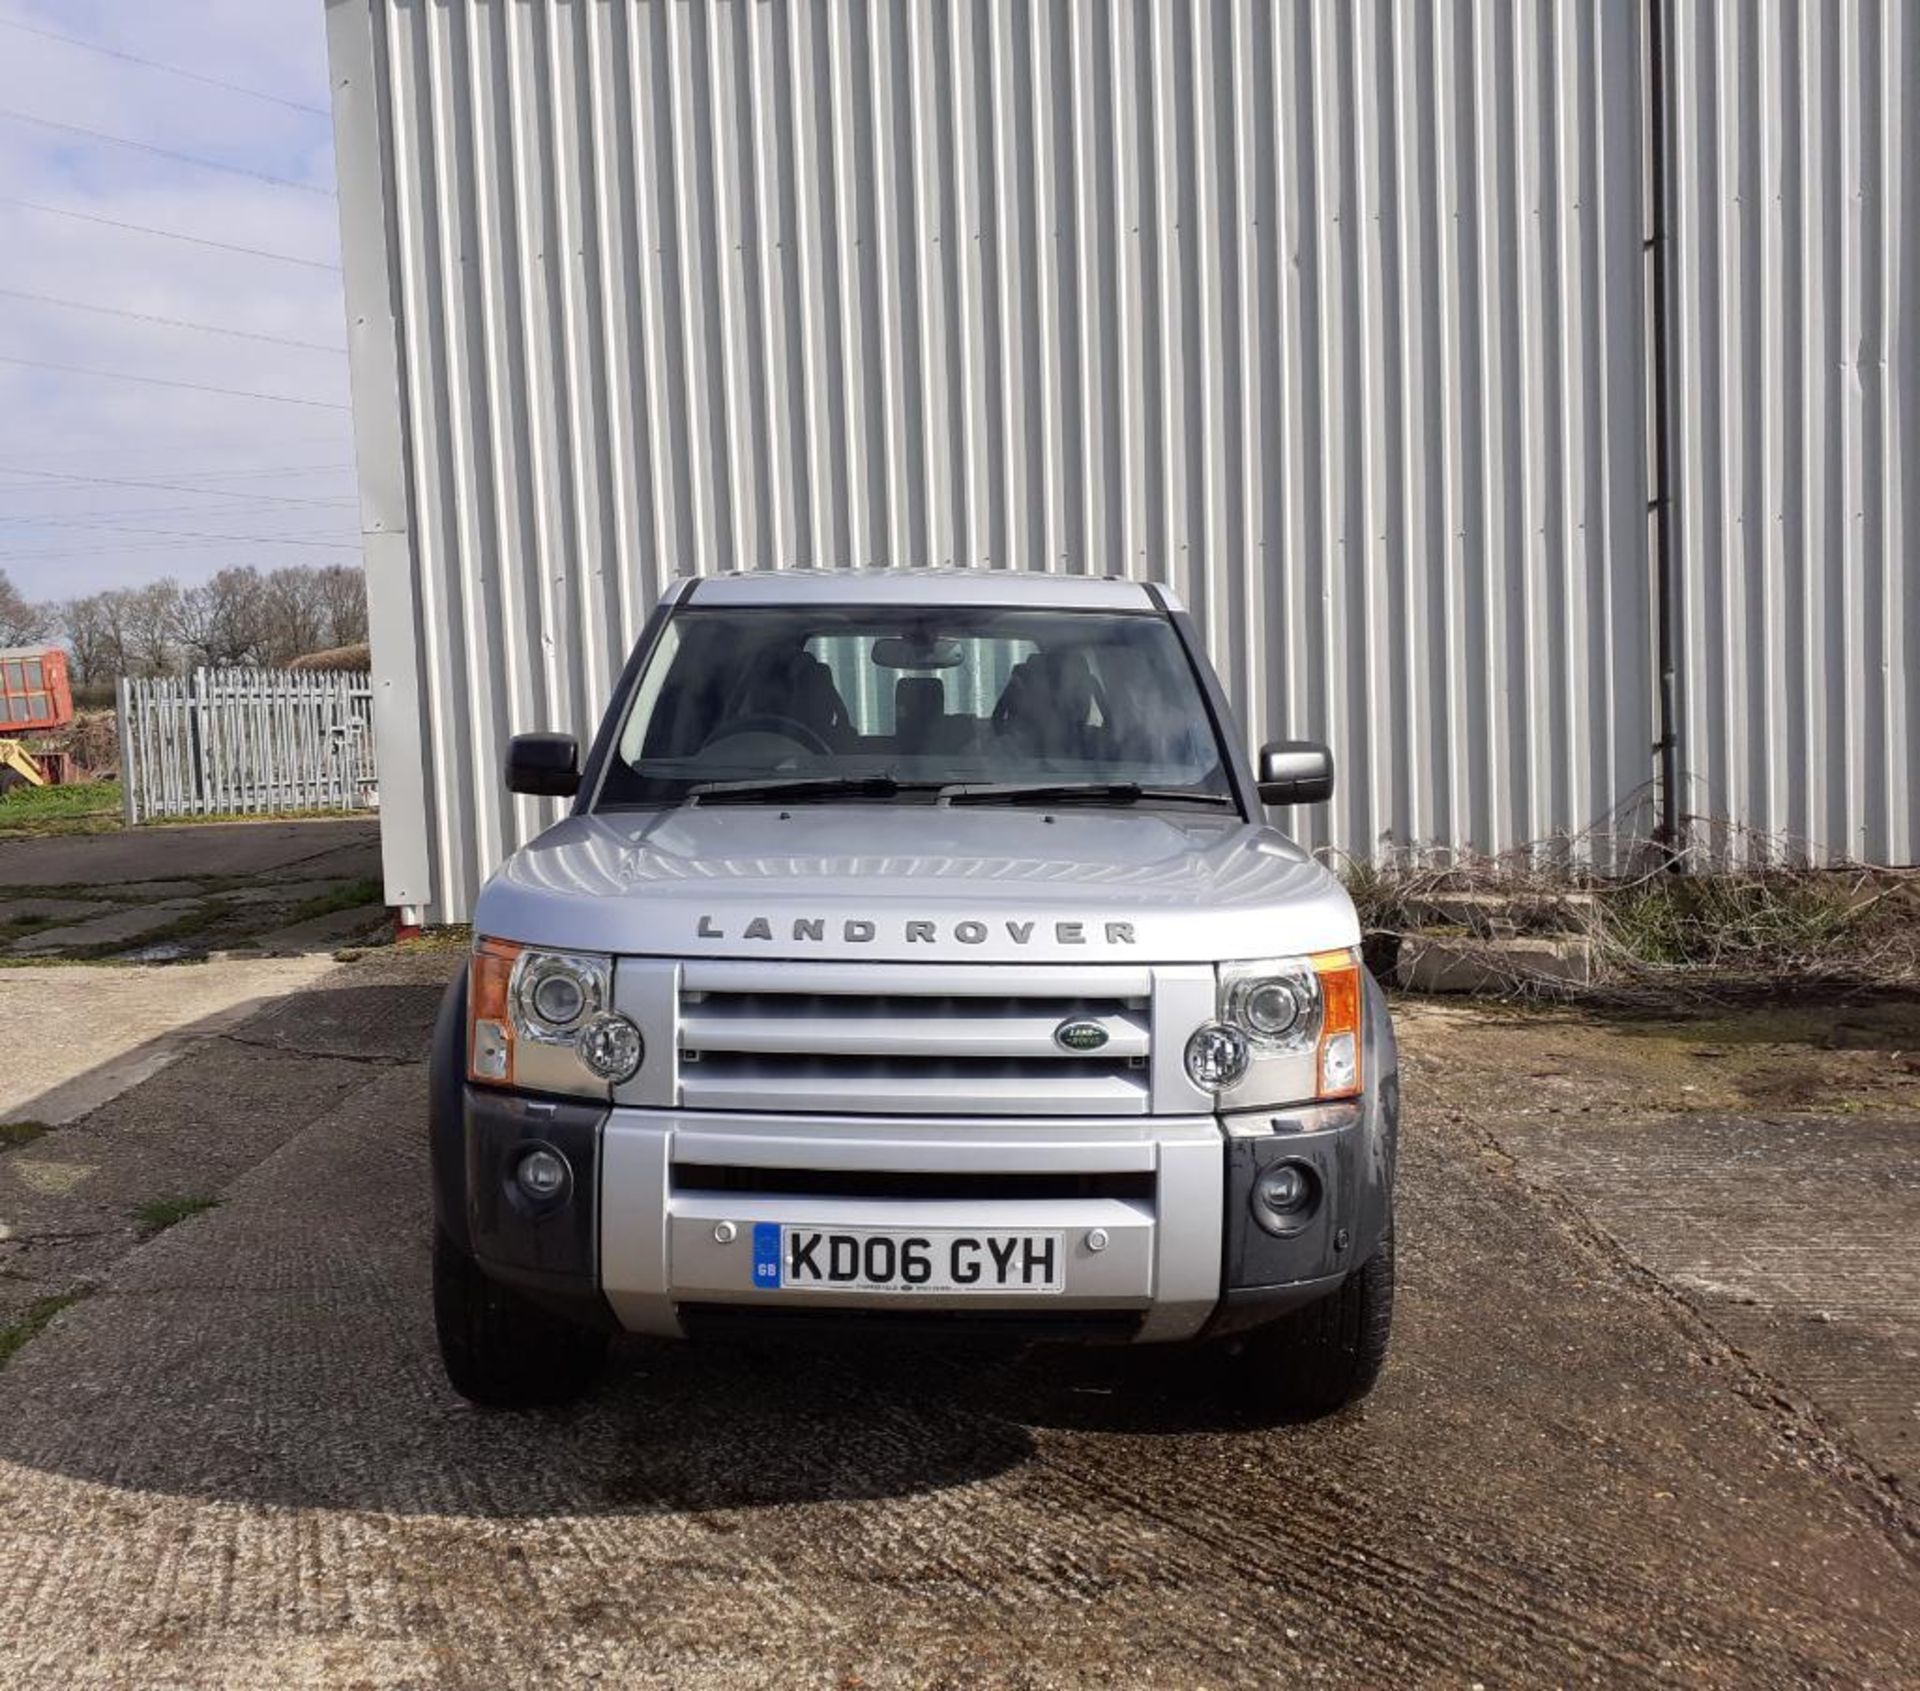 2006 Land Rover Discovery 3 TDV6S, 4wd, silver, manual, diesel. Reg: KD06 GYH. Miles: 119,637. NB: r - Image 2 of 5